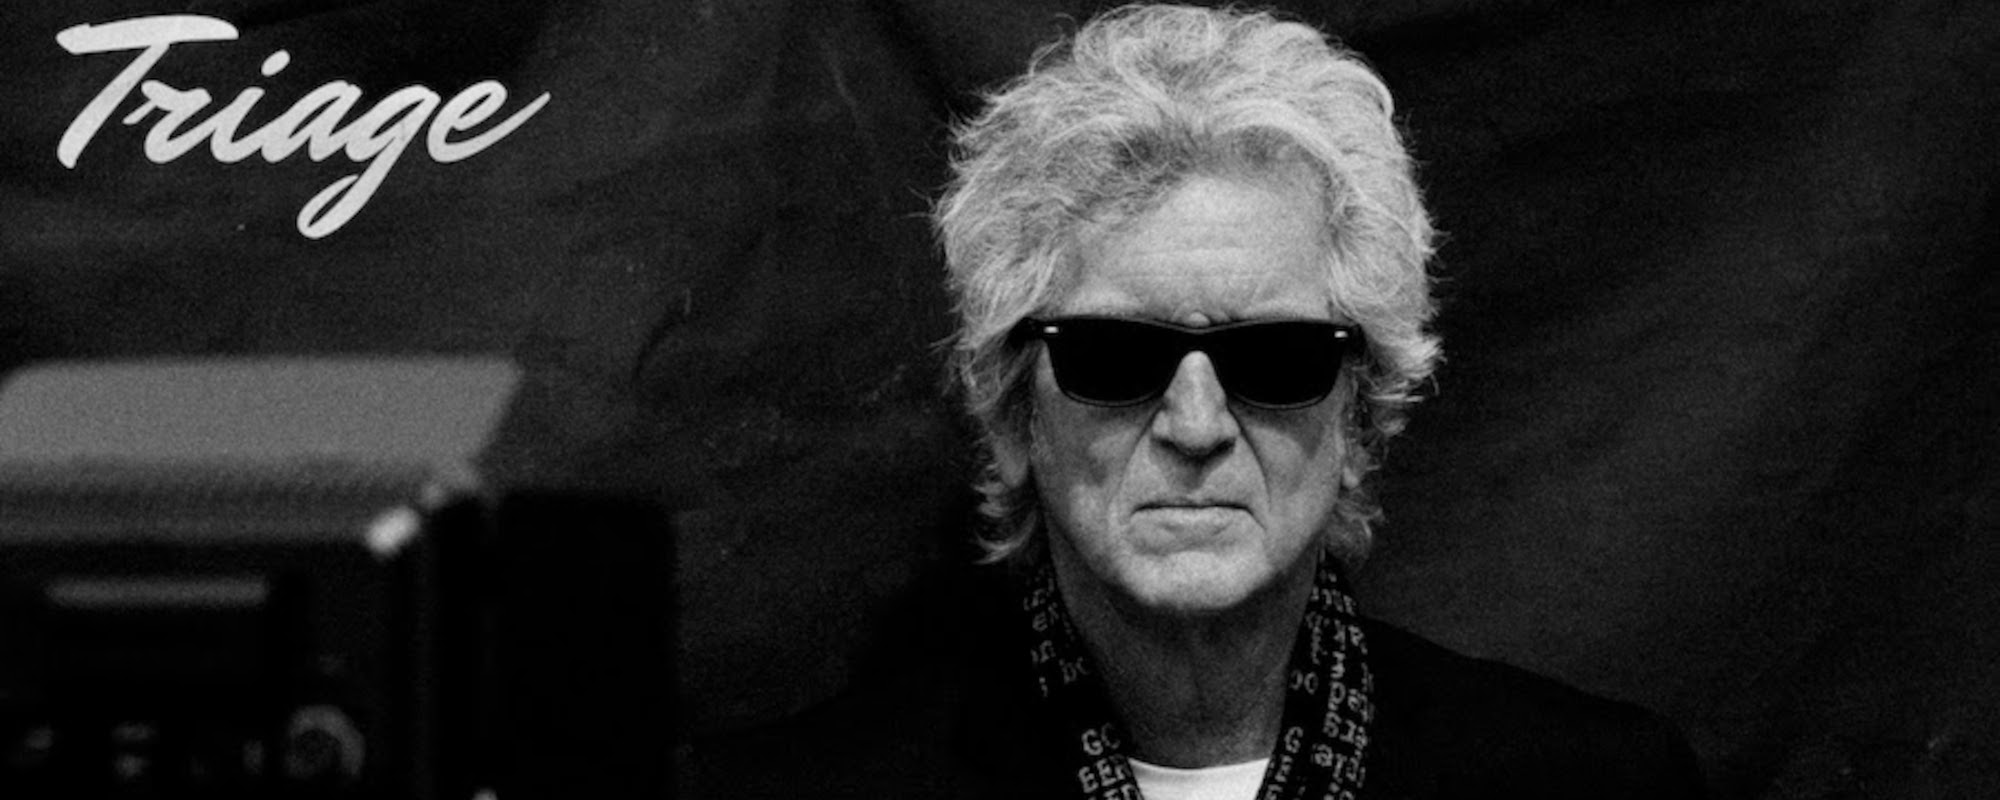 Review: Rodney Crowell Offers a Reasonable Reflection